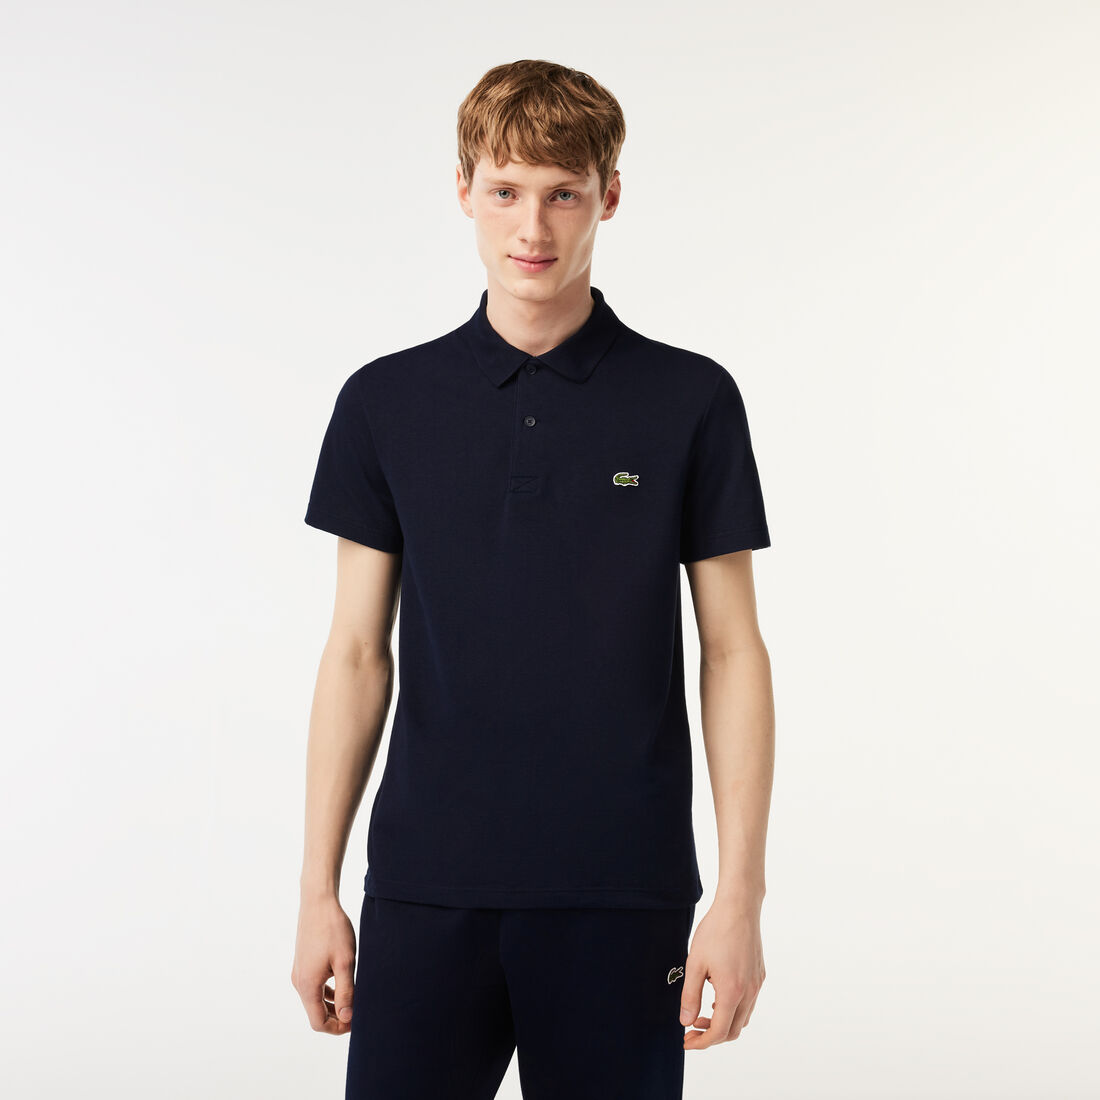 Regular Fit Polyester Cotton Polo Shirt - DH0783-00-166